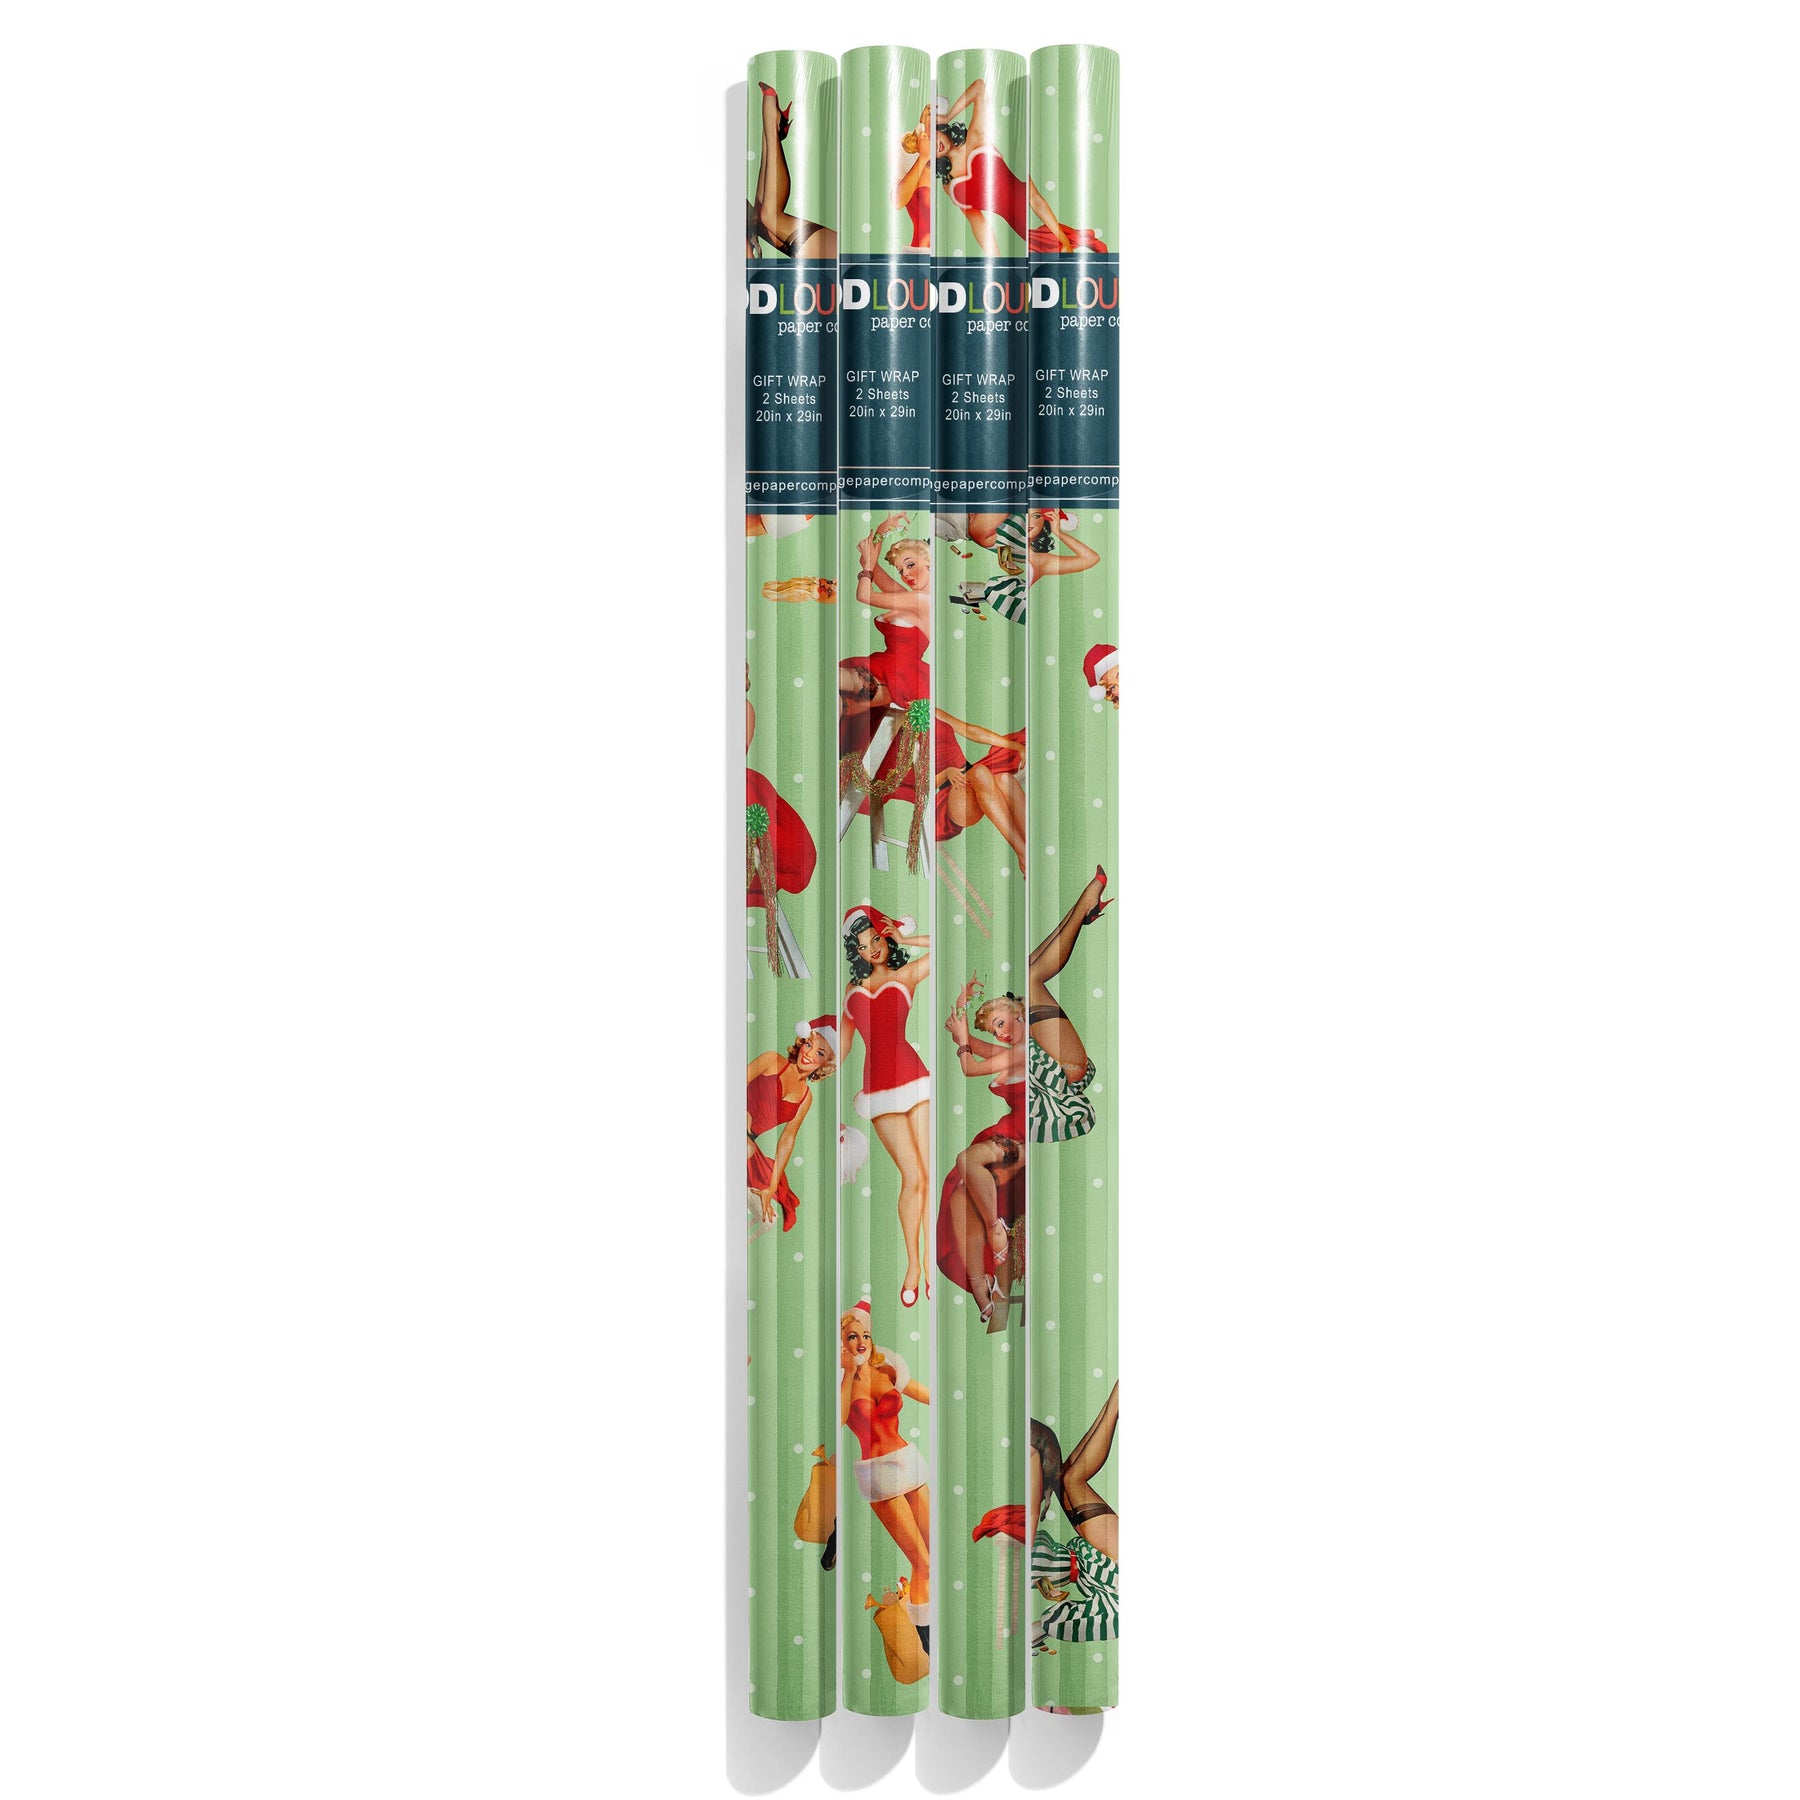 52x75cm Gift Wrapping Paper Roll Vintage Newspaper Double Sided